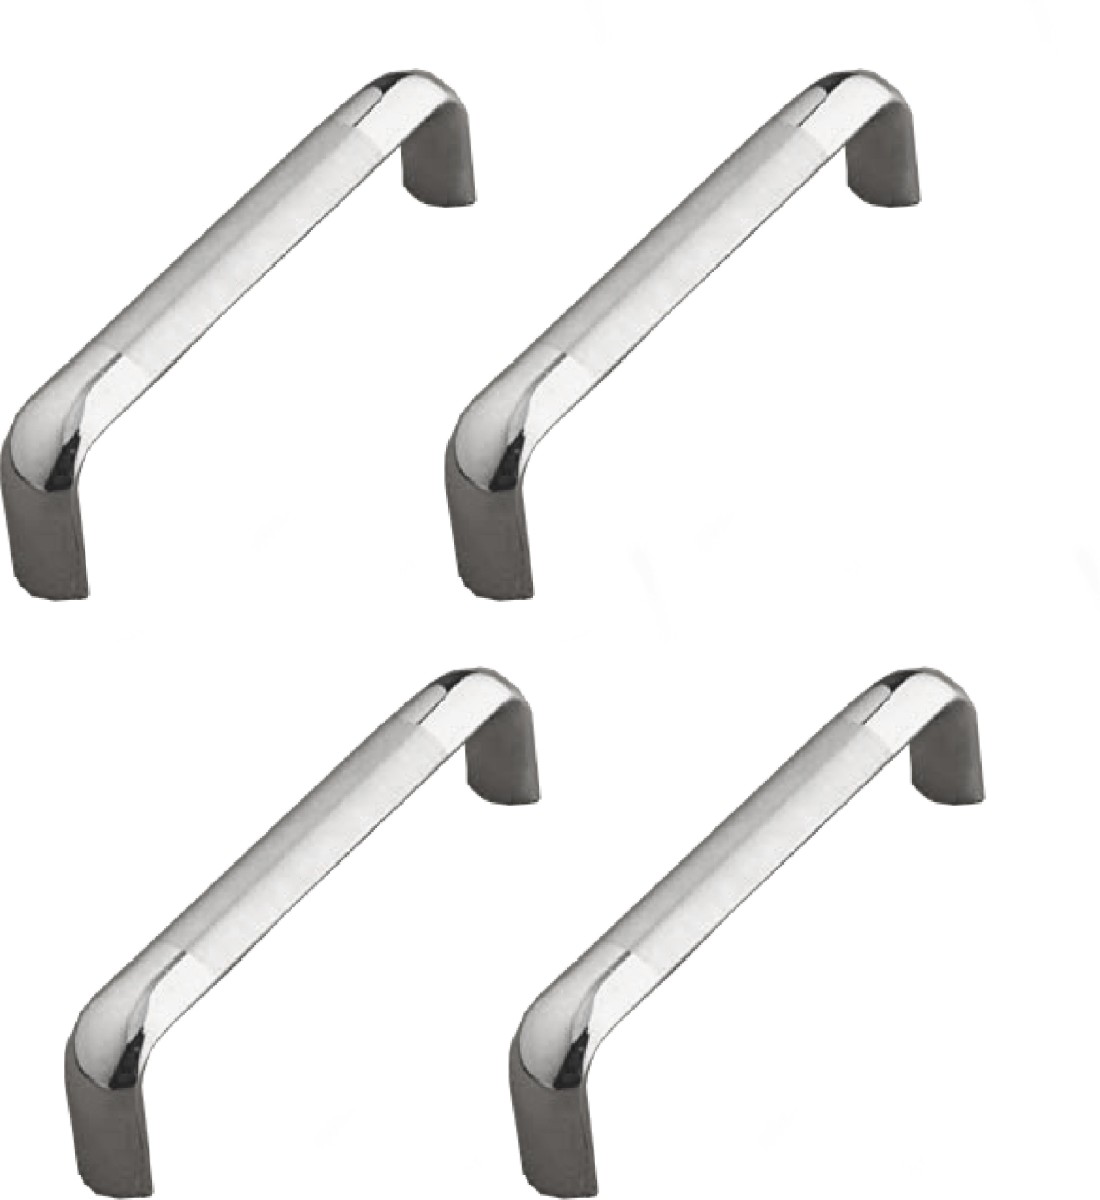 Life Vision Premium Quality Cabinet / Drawer / Cupboard Handles 202  Stainless Steel Heavy H Two Ton Type Size 6 Inch Pack of 2 Piece Include  Screws